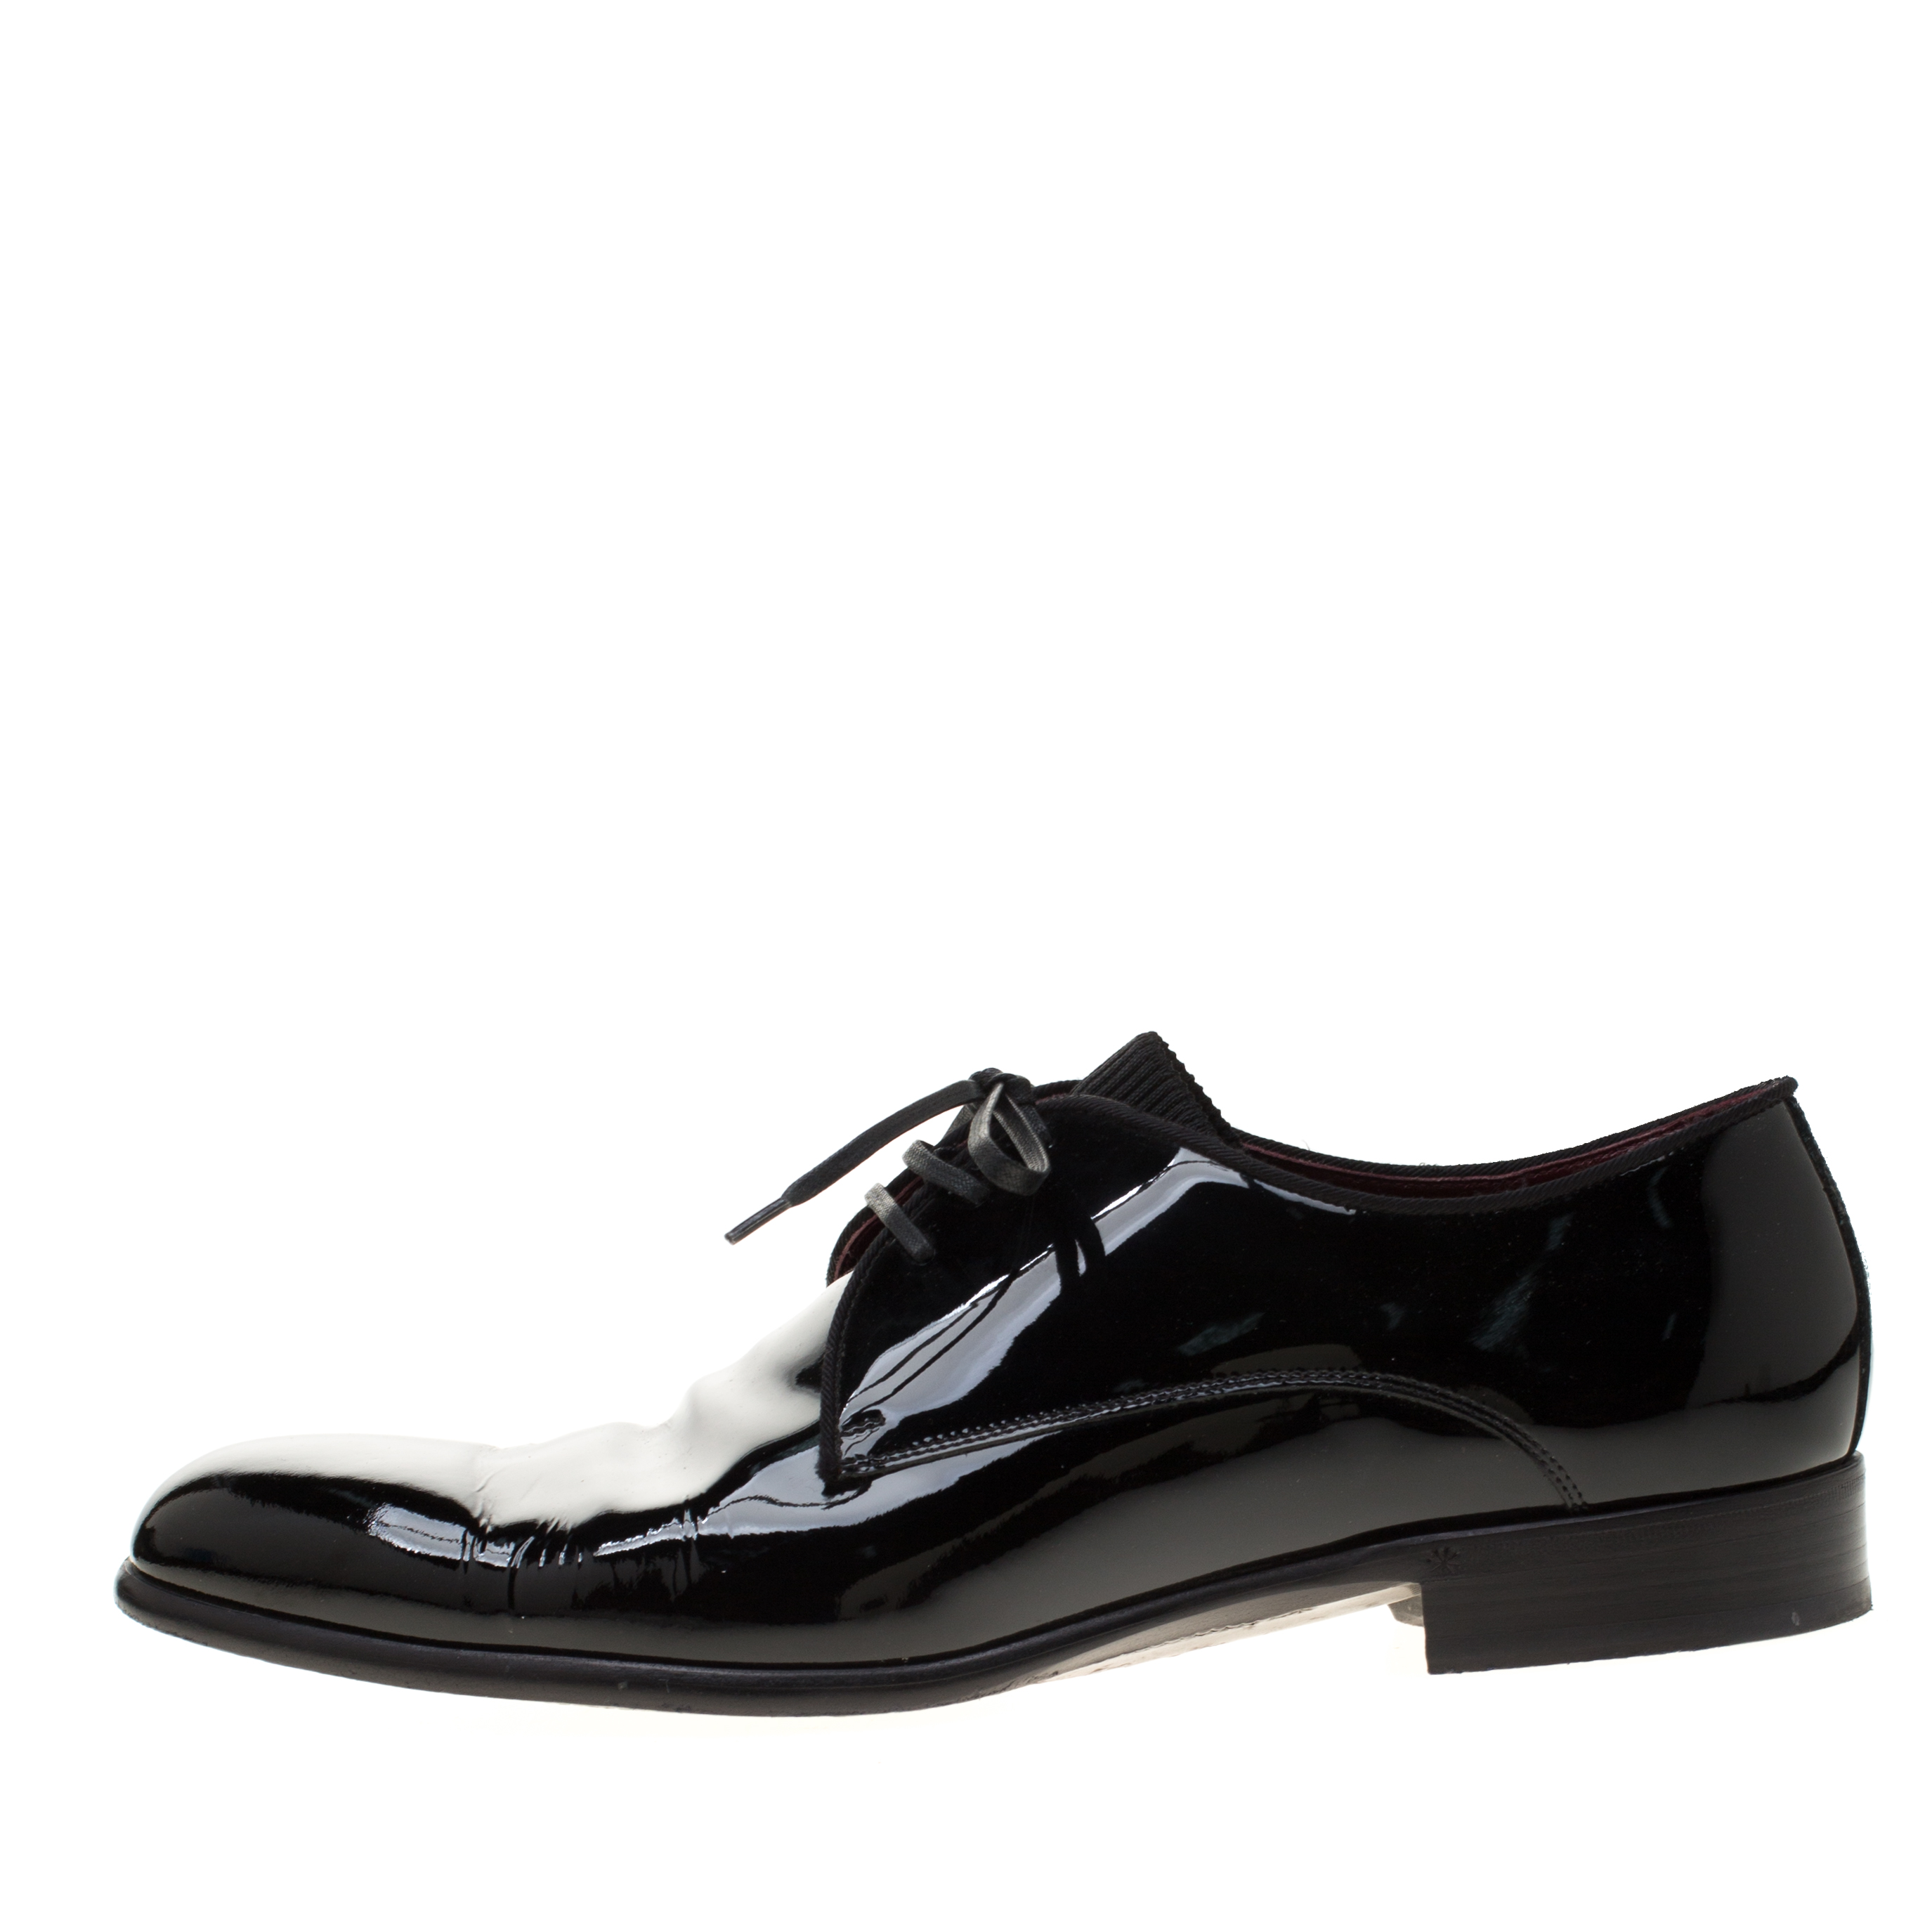 Dolce & Gabbana Black Patent Leather Derby Oxford Shoes Size 43